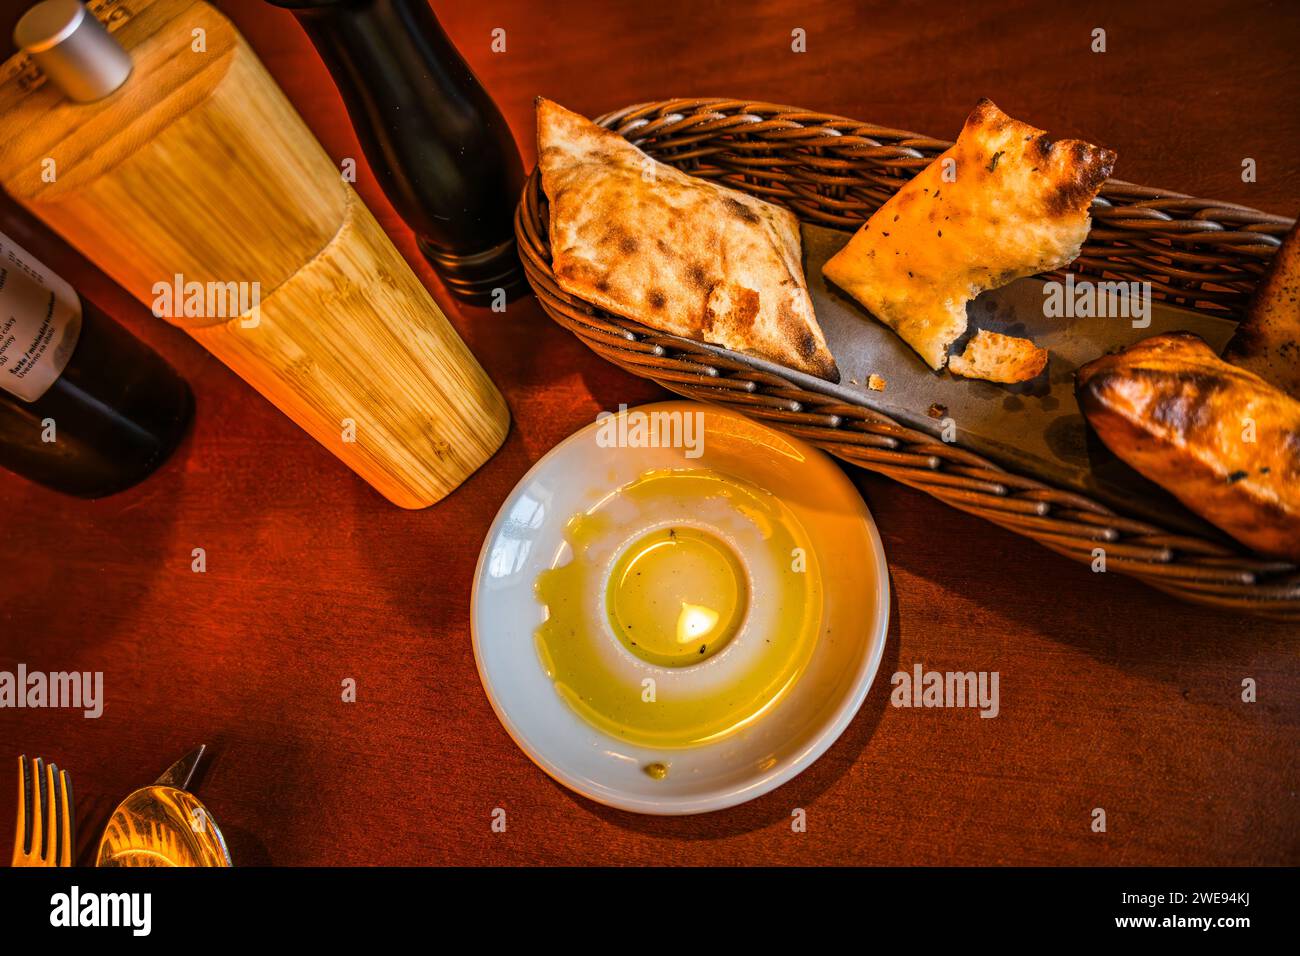 Pastry in wicker basket, olive oil on small plate, spice rack, cutlery on restaurant table. Stock Photo